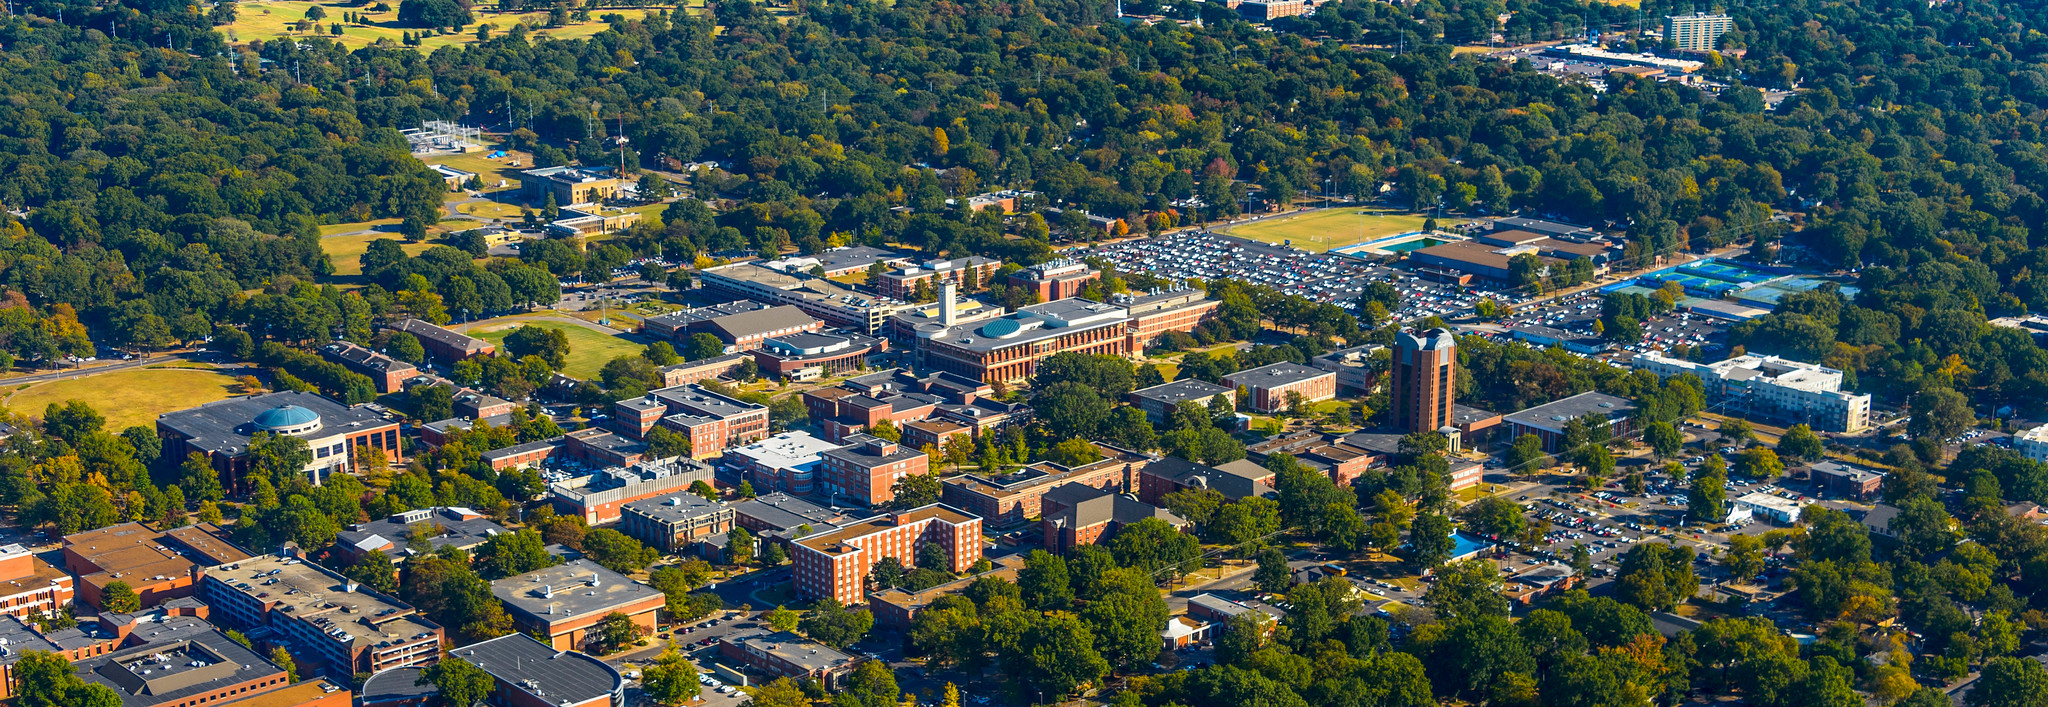 Aerial View of UofM Campus